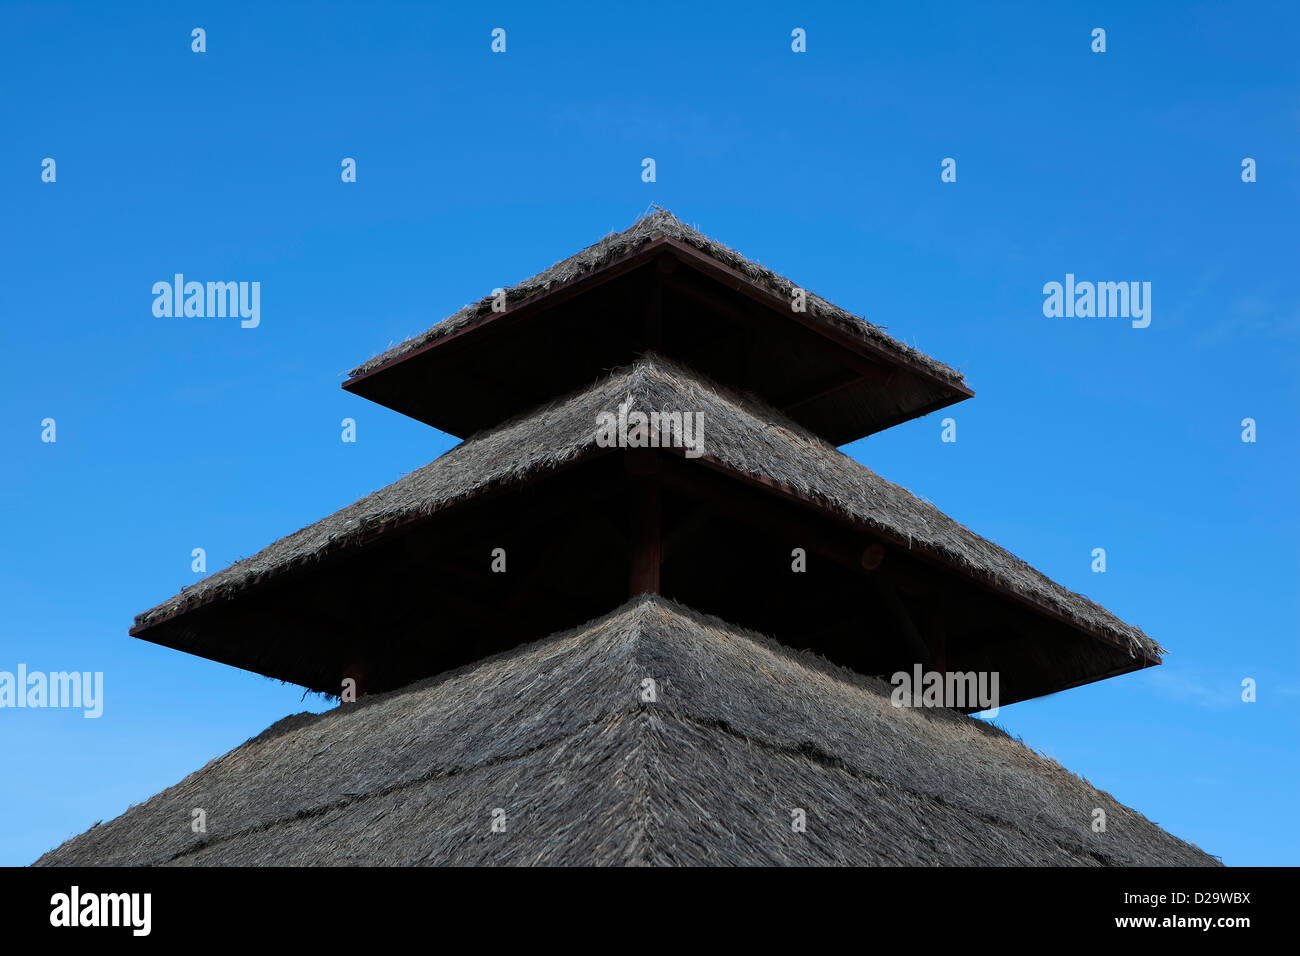 An image of 3 tiers roof made by straw facing up the sky. Stock Photo